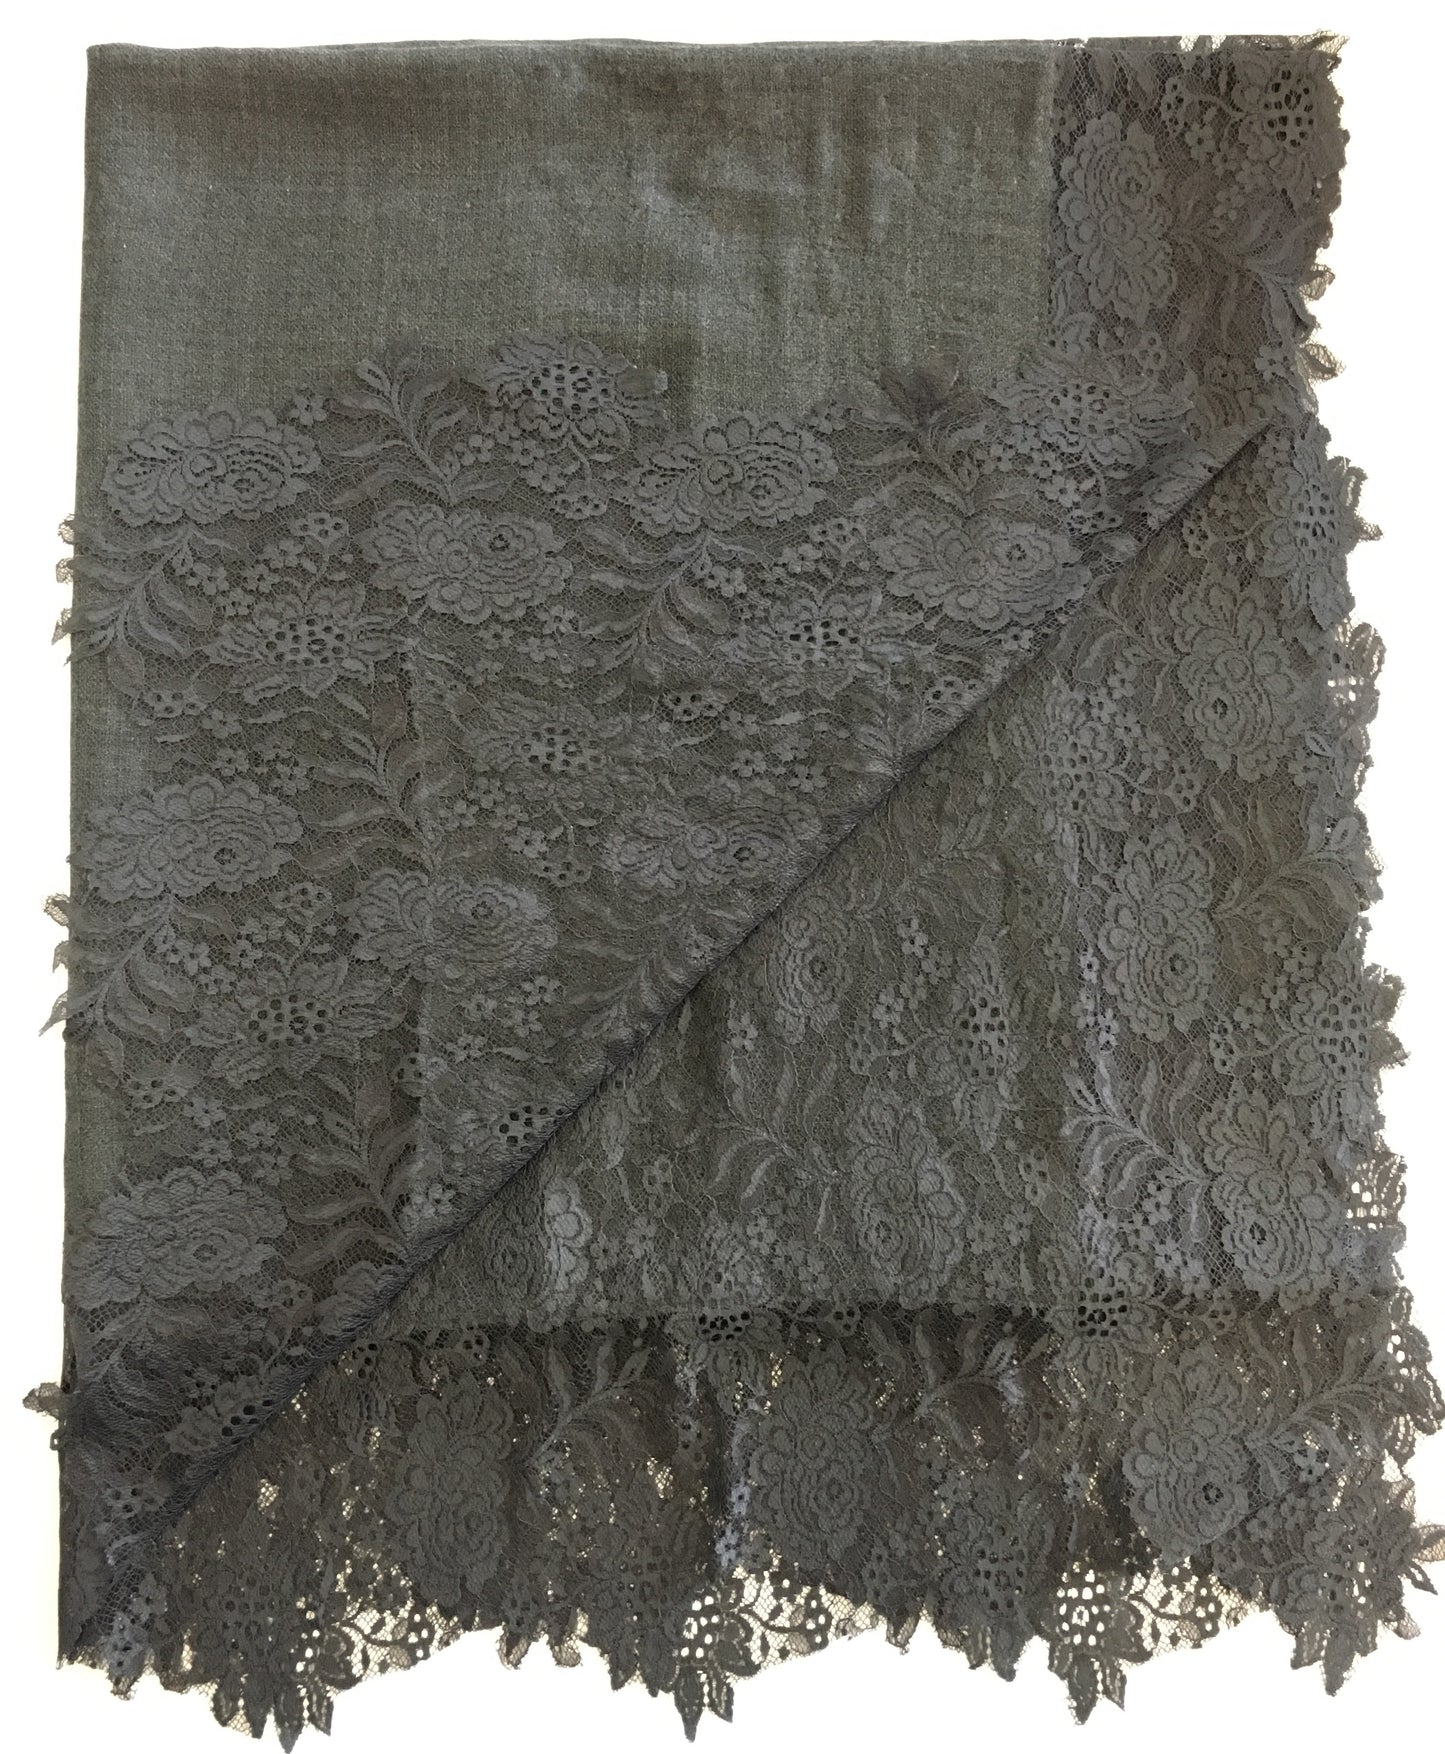 Charcoal lace melange wool & silk scarf available also in Taupe